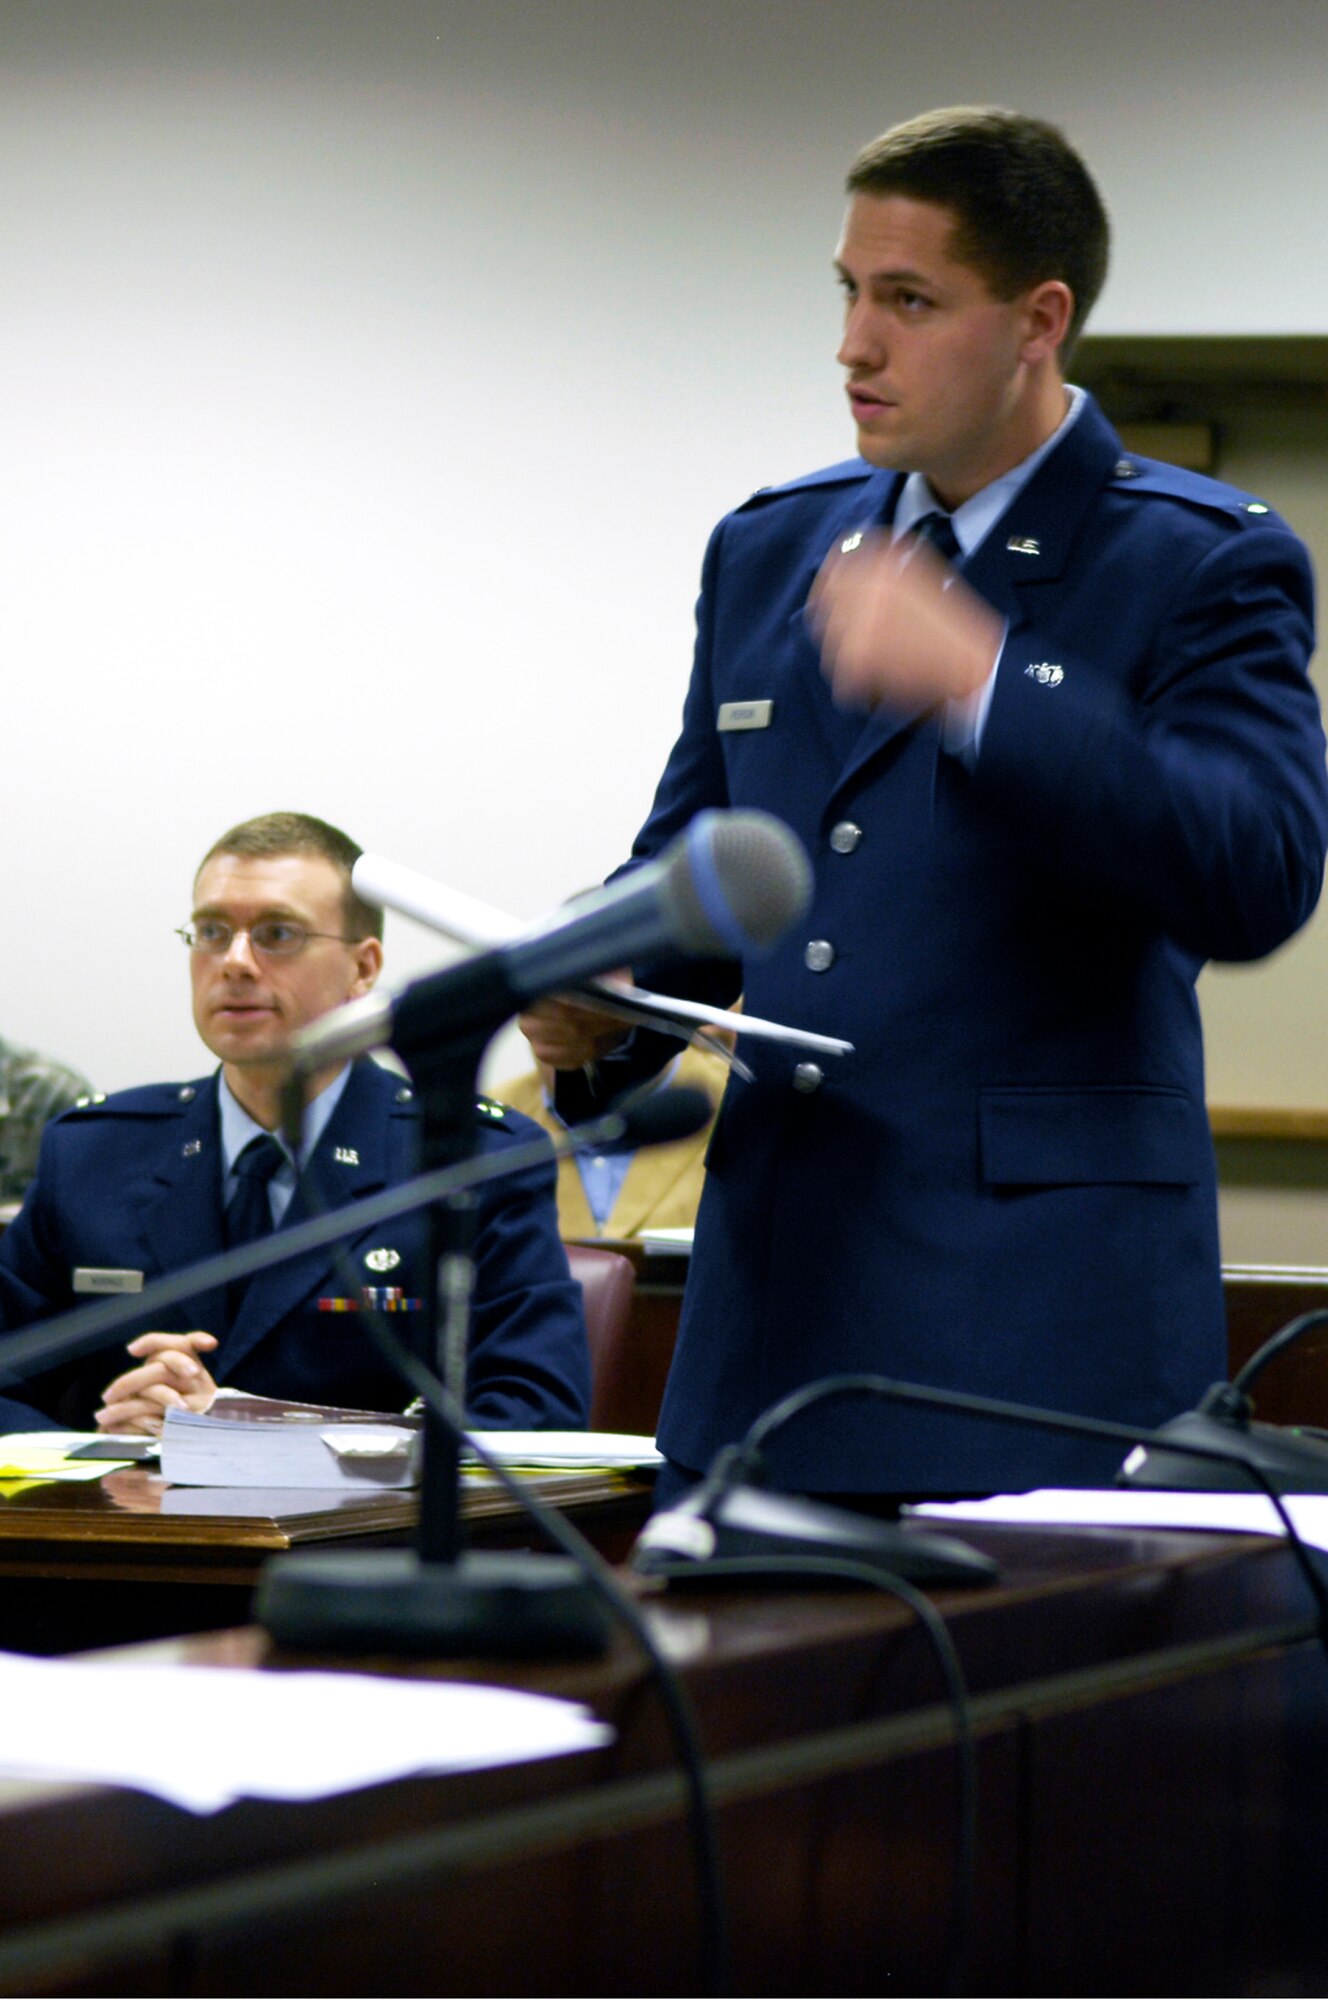 WHITEMAN AIR FORCE BASE, Mo. - 1st Lt. Michael Pierson, 509th Bomb Wing legal office attorney, poses questions to a witness during a simulated trial May 13. The simulated trial was part of an exercise between the 509th Security Forces Squadron and the wing legal office that allowed one section to see how the other functioned. (U.S. Air Force photo/Staff Sgt. Jason Barebo)